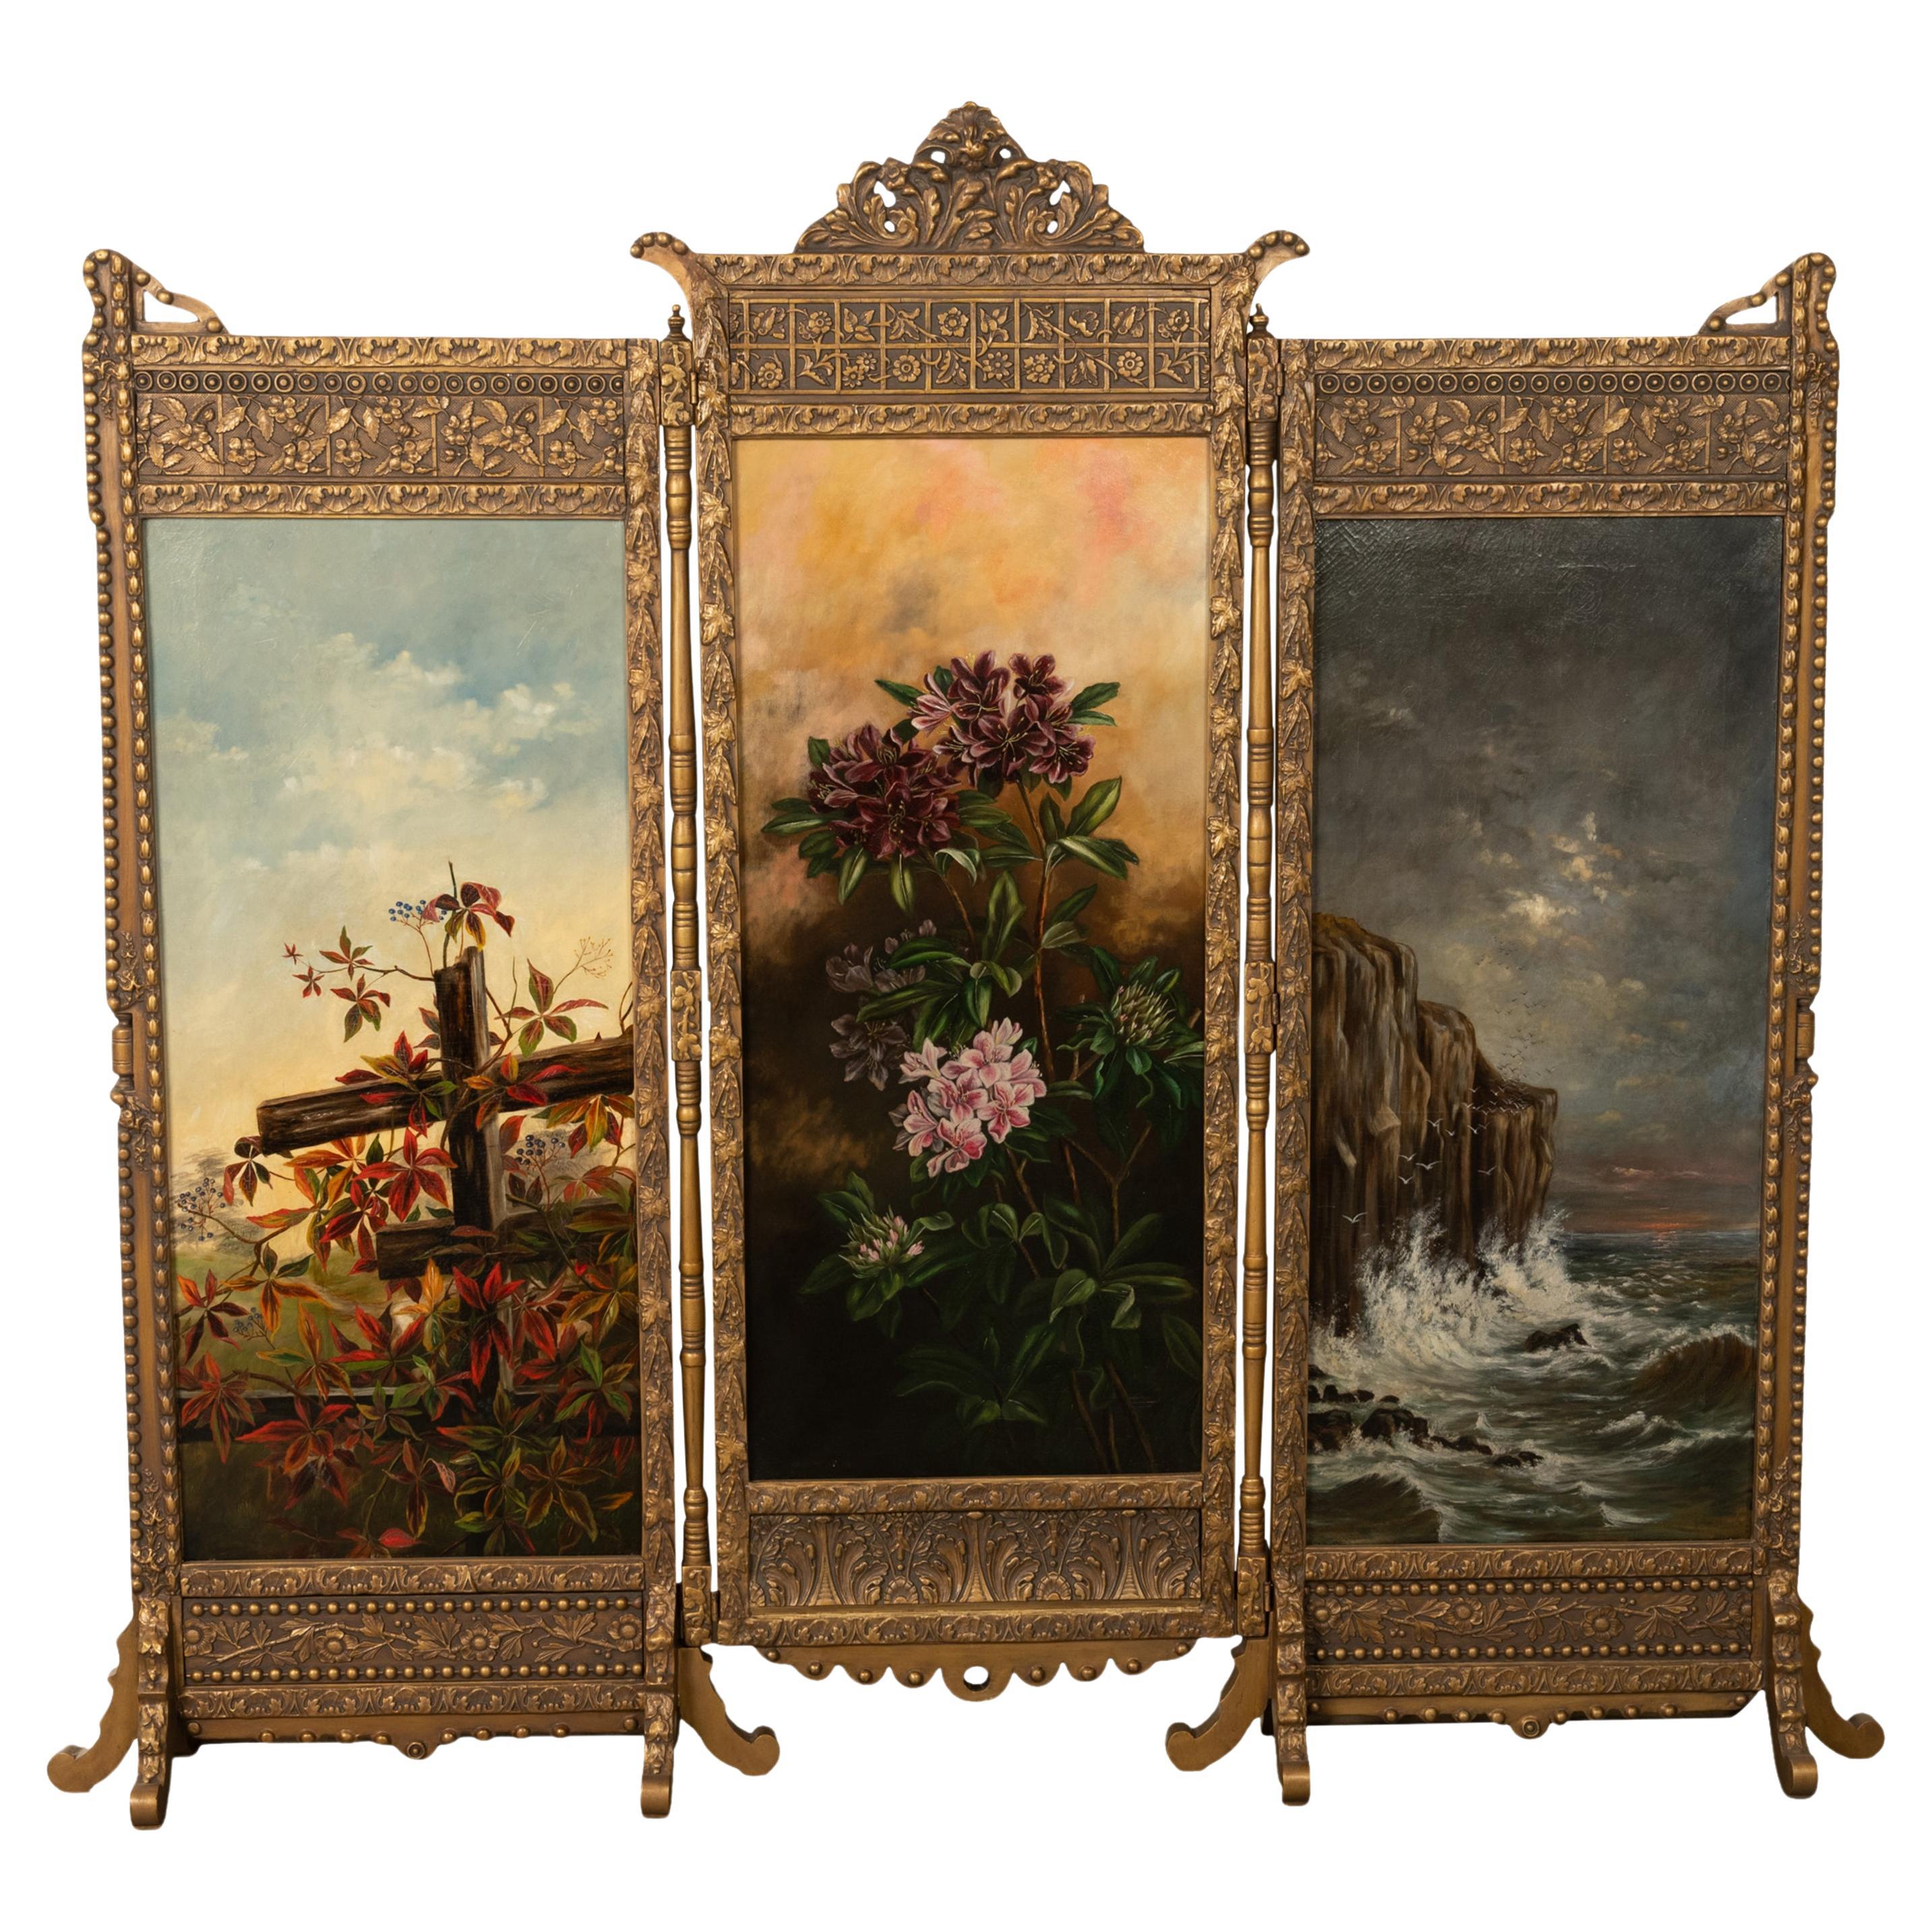  Antique Gilded Room Divider Screen Oil Painting Aesthetic Movement NY 1885 For Sale